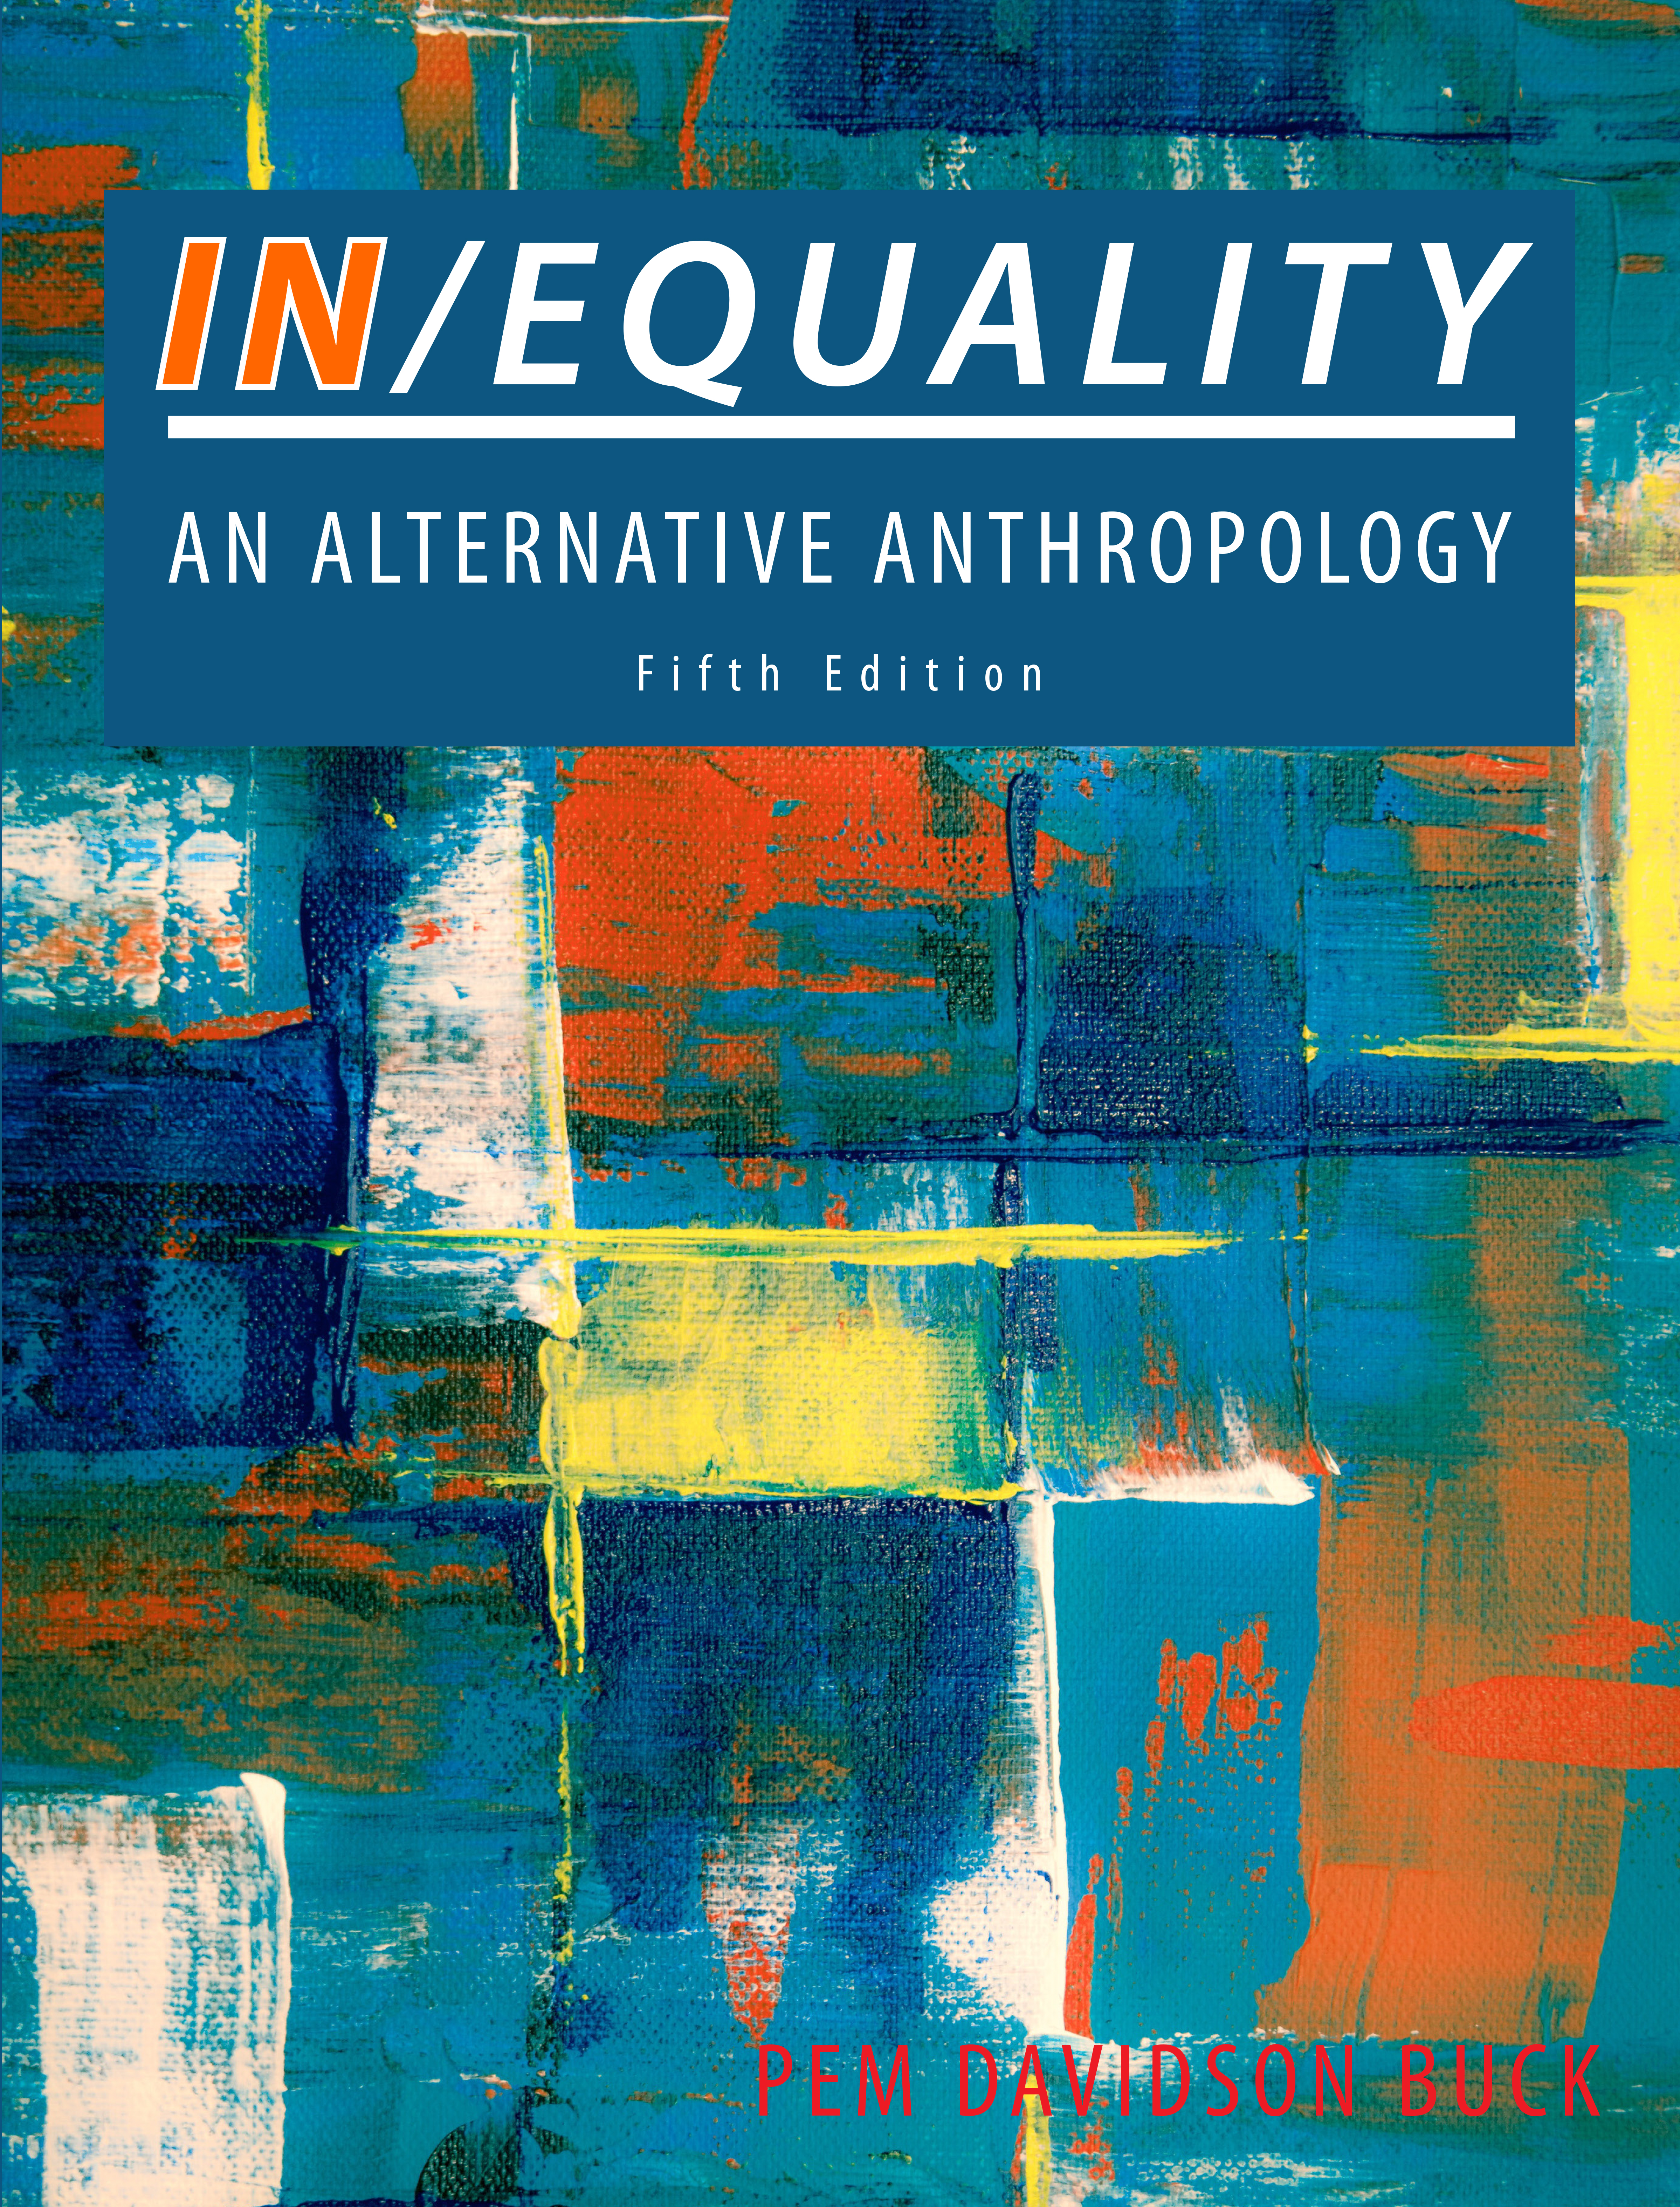 In/Equality: An Alternative Anthropology 5th Edition